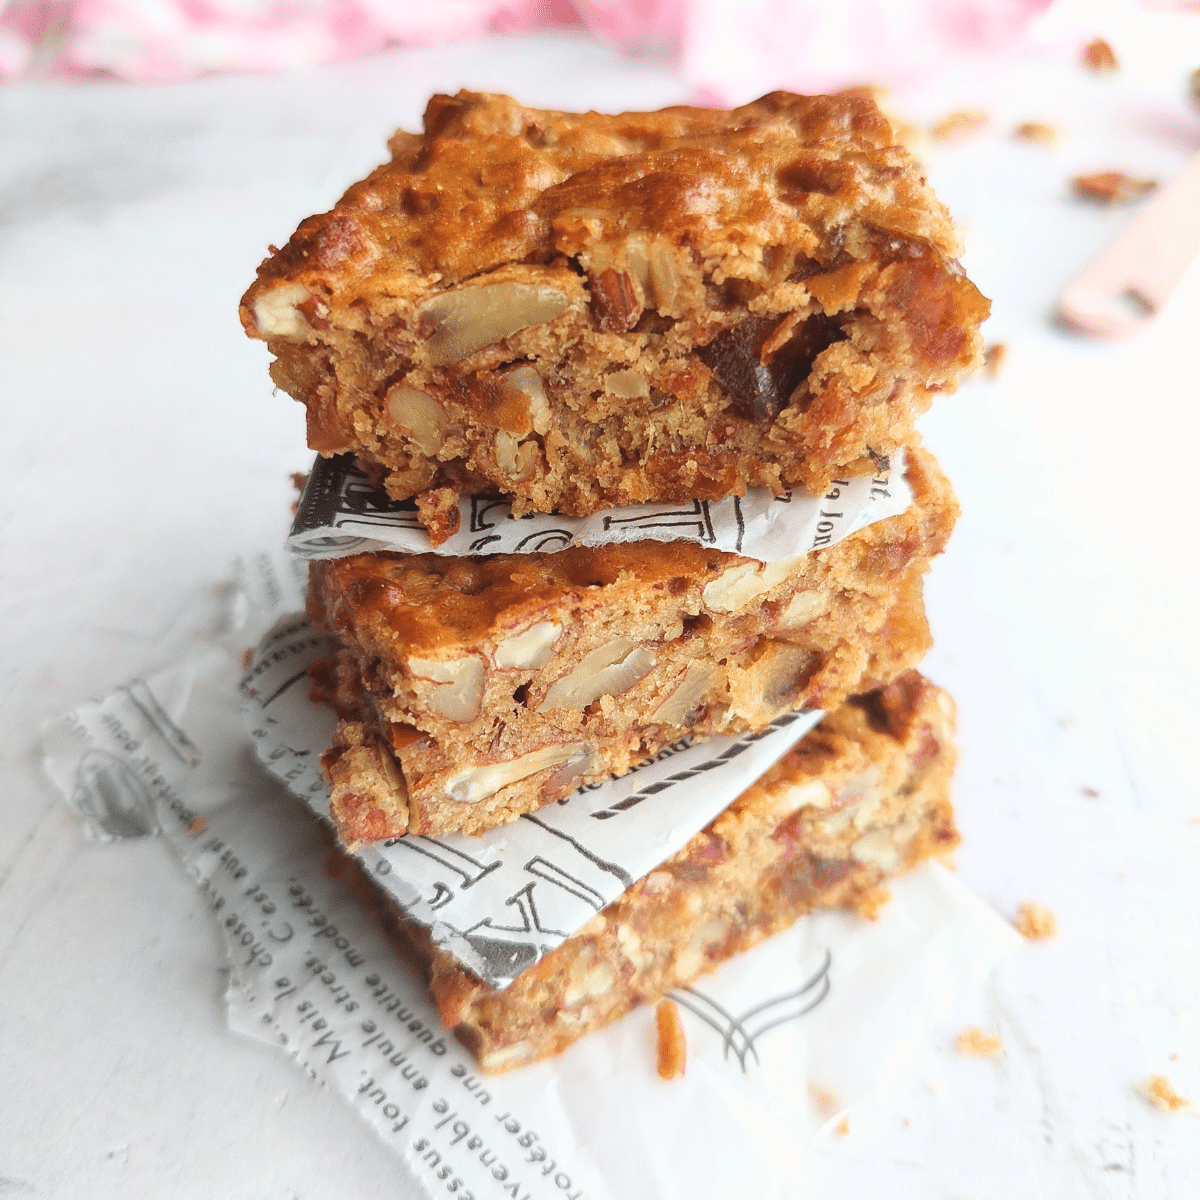 just mix all the ingredients using a bowl and spatula! From start to finish, including baking time, these yummy bars are ready to enjoy in less than 45 minutes.